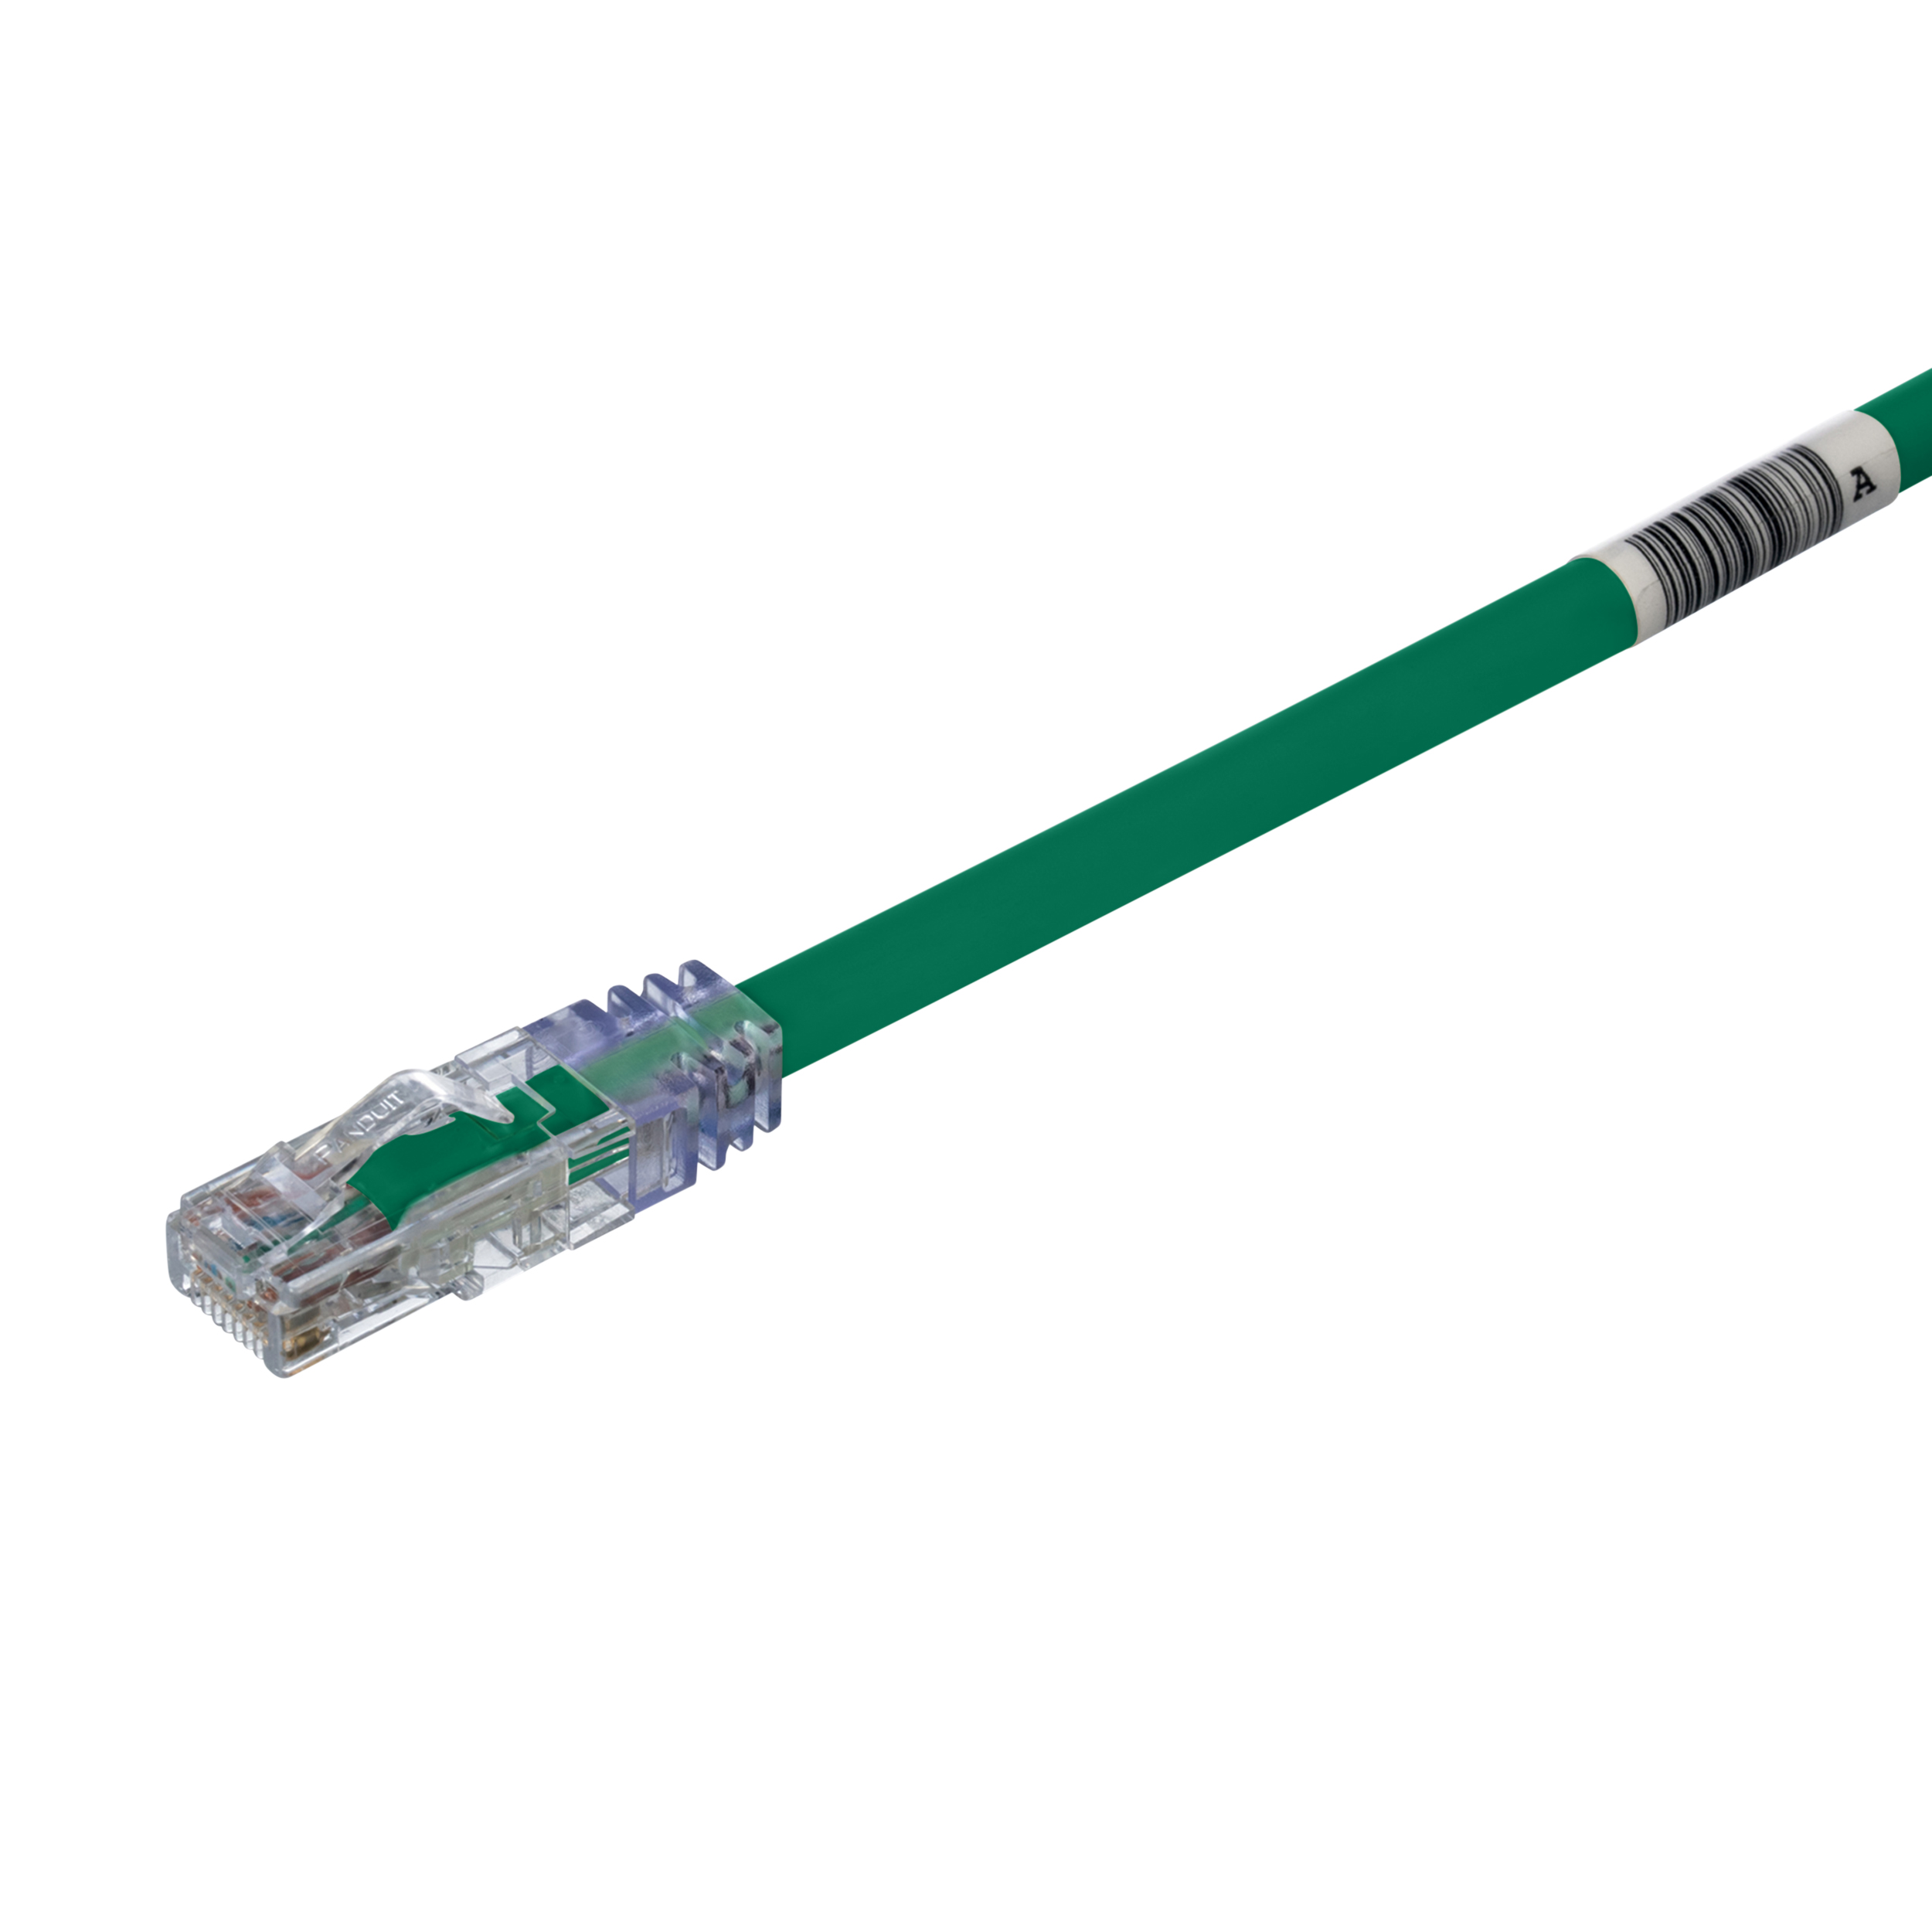 Cat 6A 24 AWG UTP Copper Patch Cord, 4 ft, Green